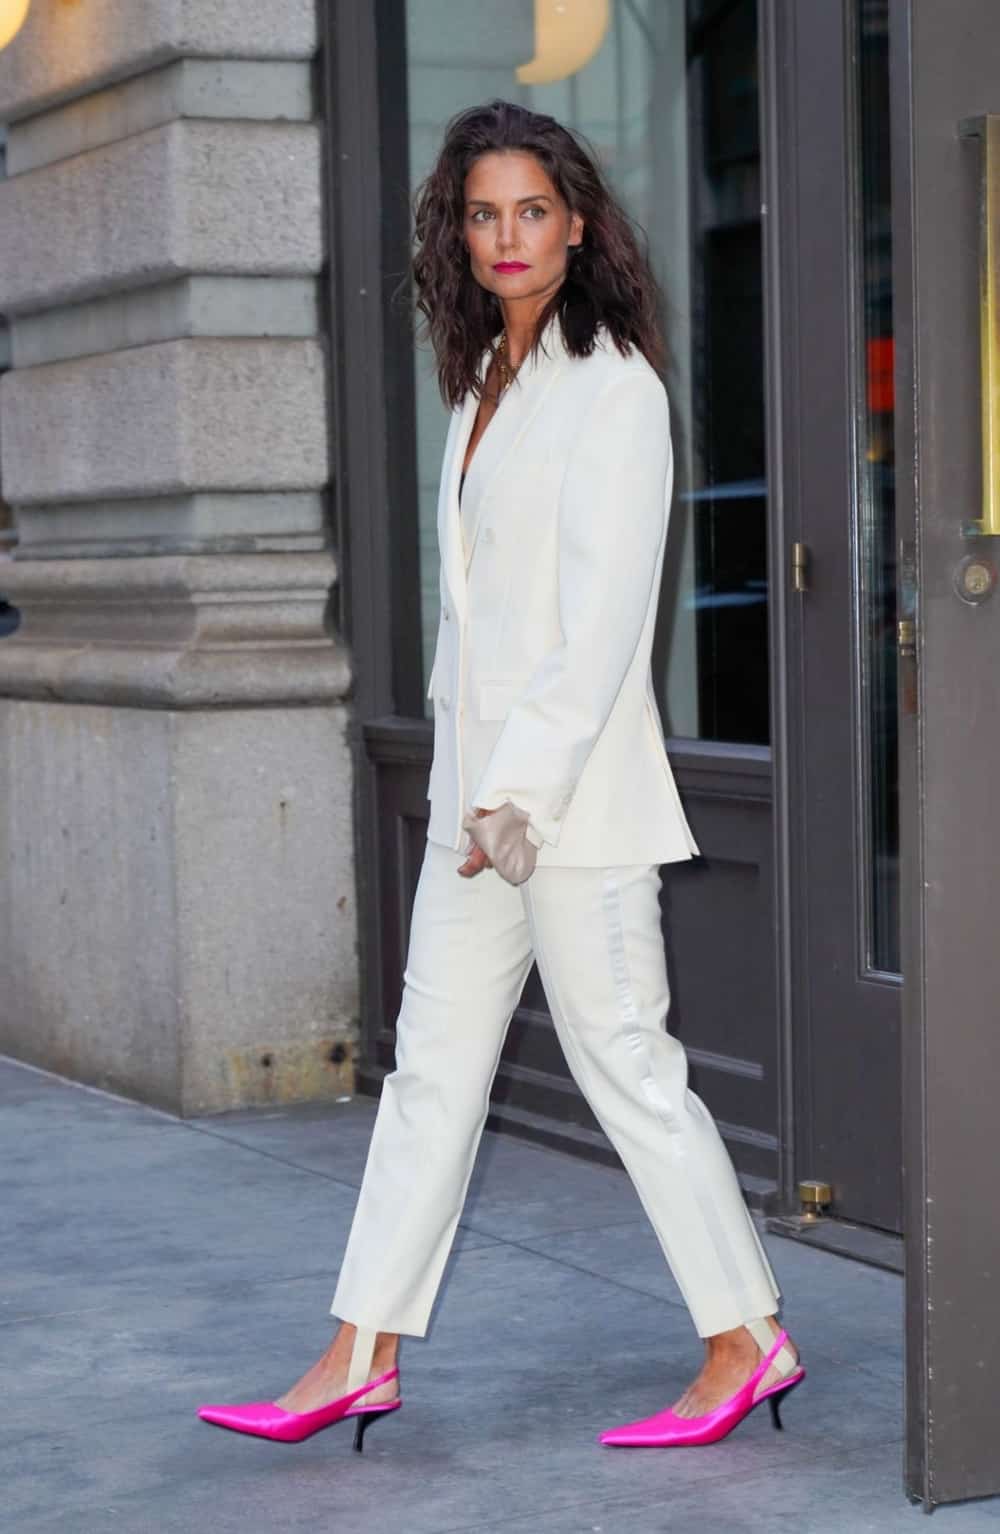 Katie Holmes Rocks a Pantsuit and Pink Heels for the RiseNY Grand Opening